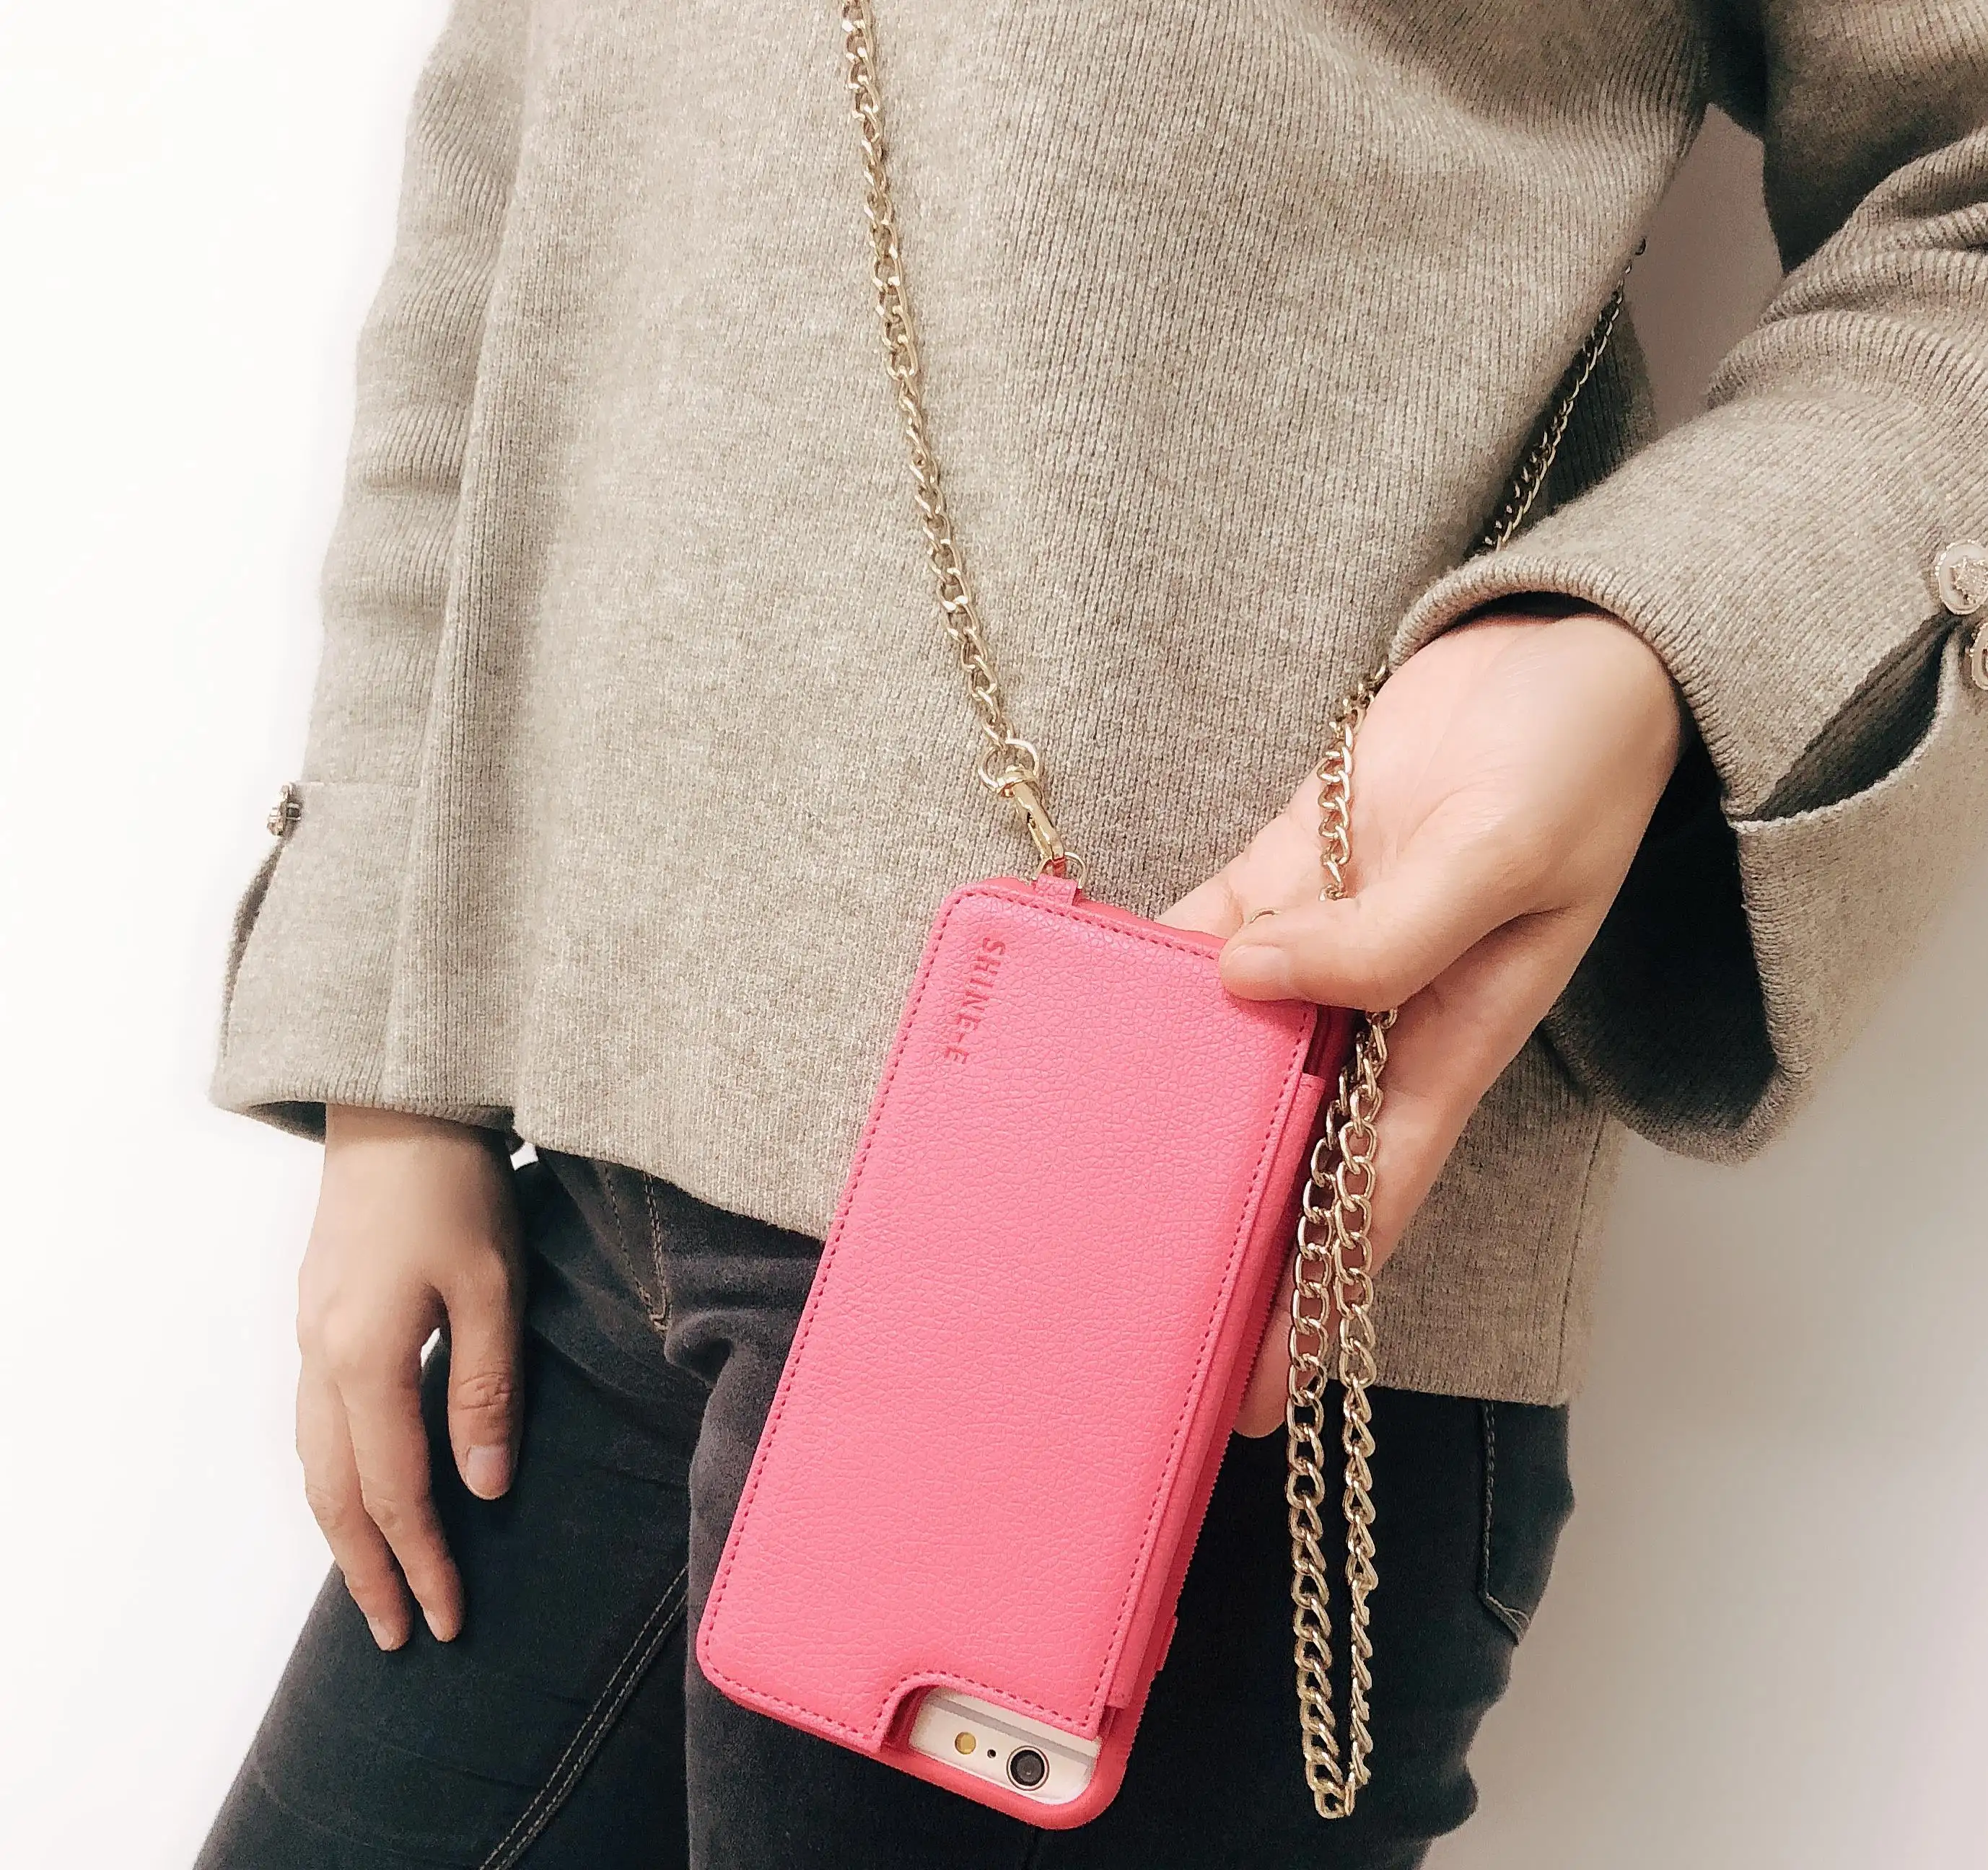 PU Leather Phone Case with Card Slot Wallet Cell Phone Case Crossbody Carry Bag for Iphone 6